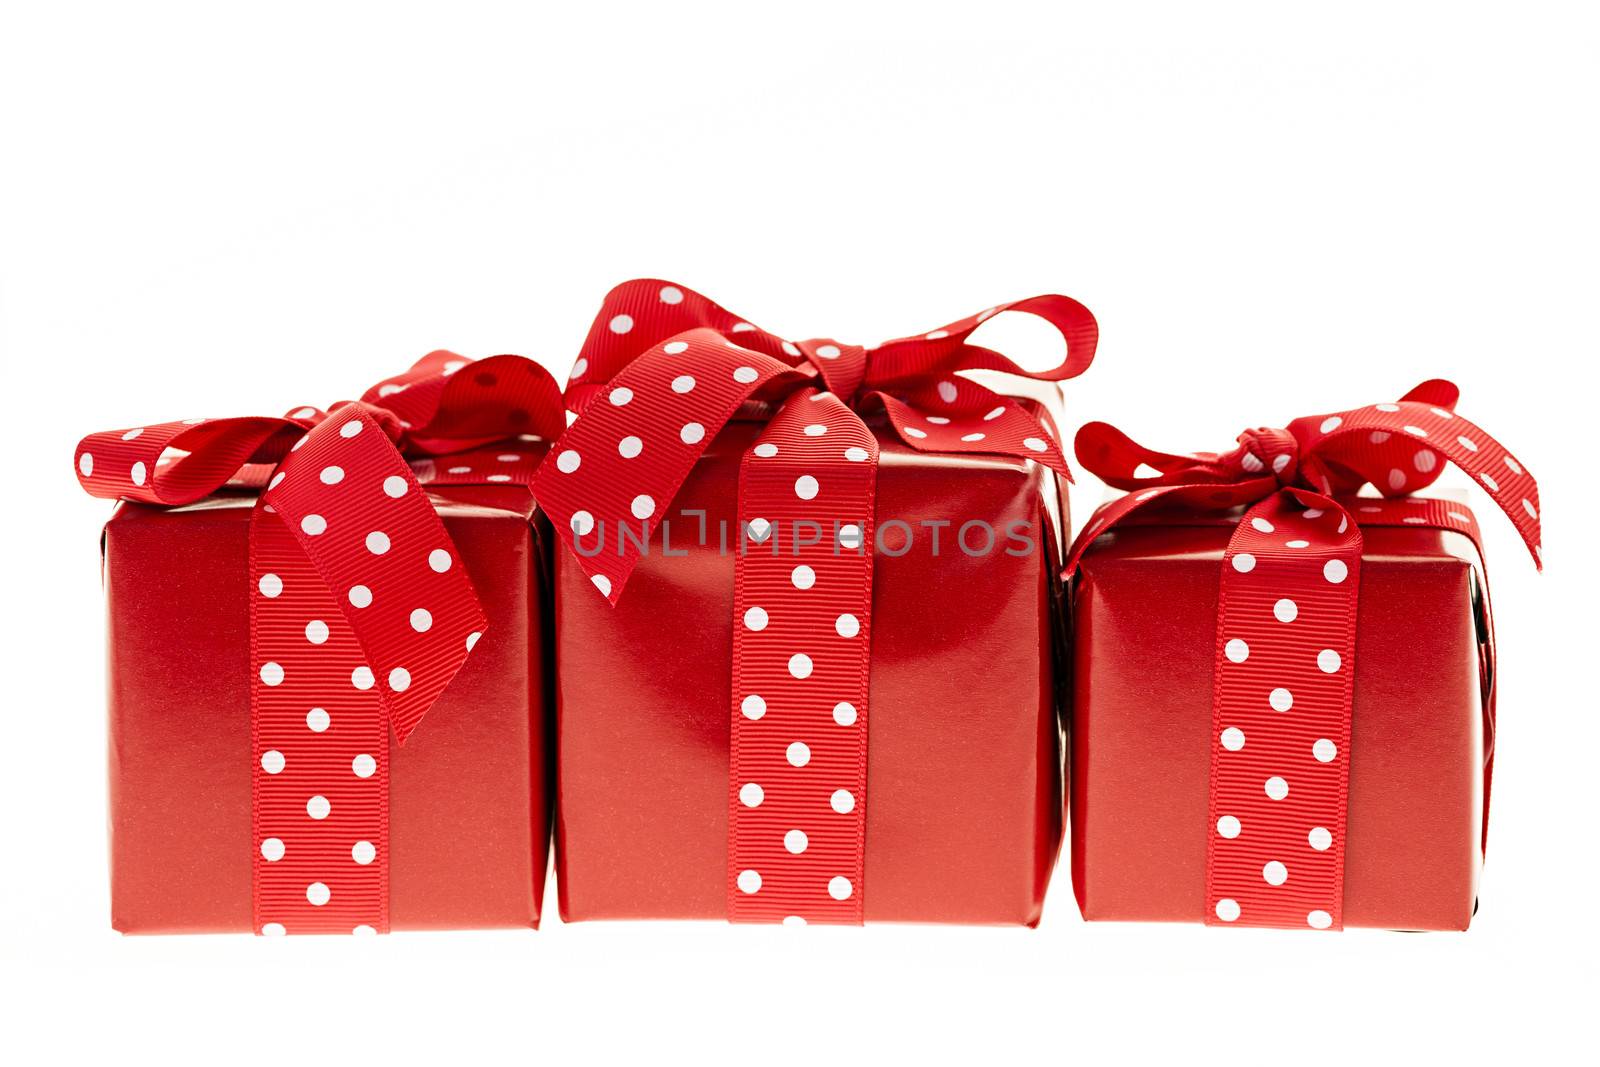 Three presents wrapped in red paper with polkadot ribbon